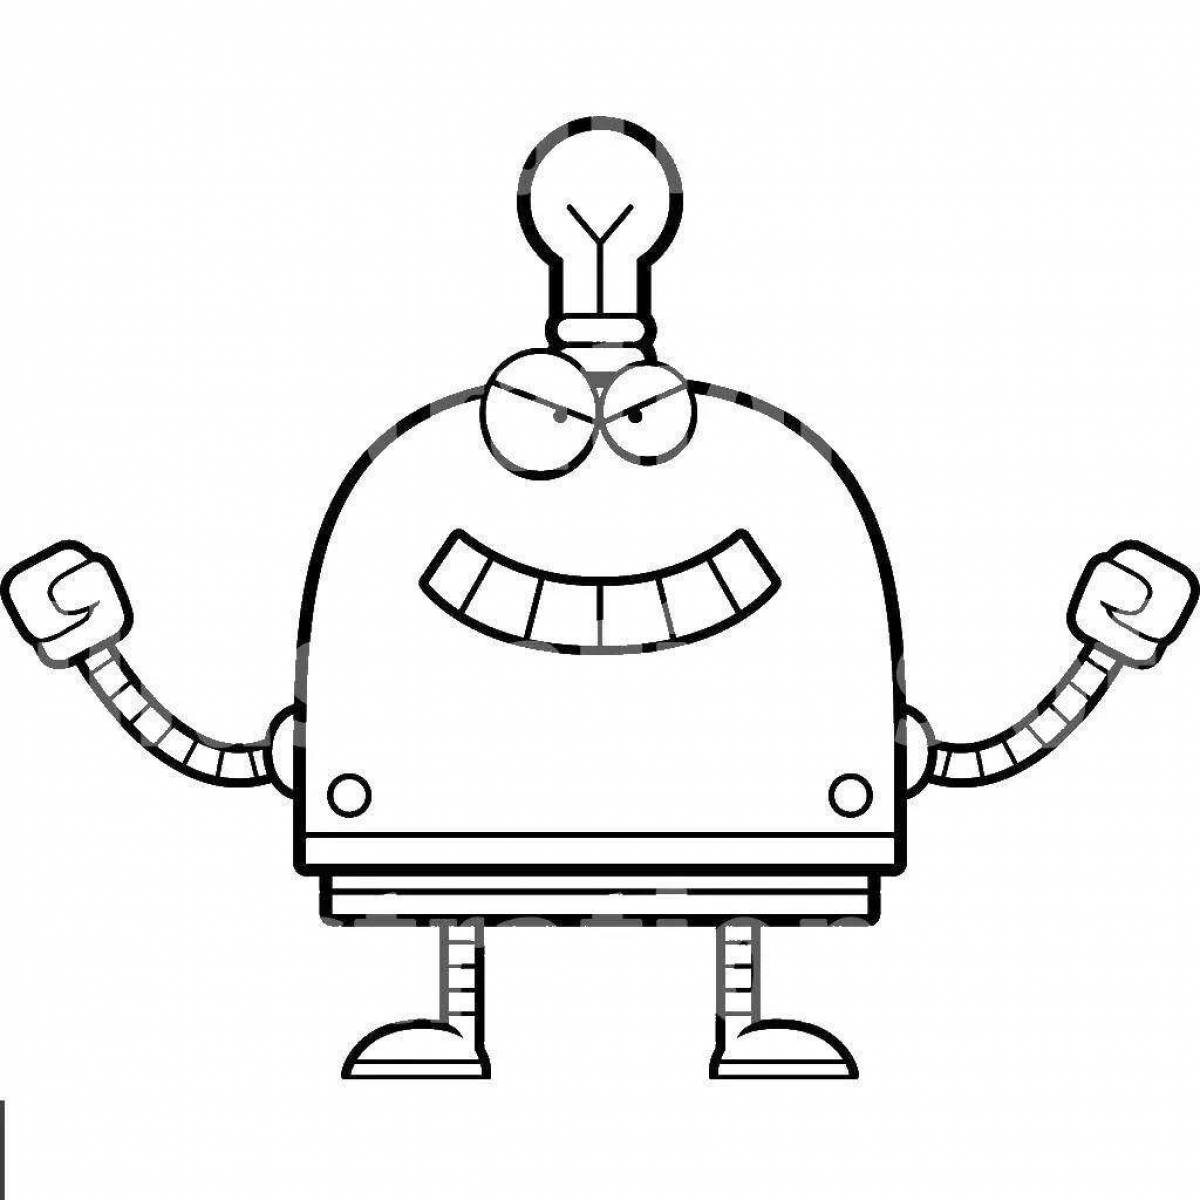 Fun robot vacuum cleaner coloring book for boys